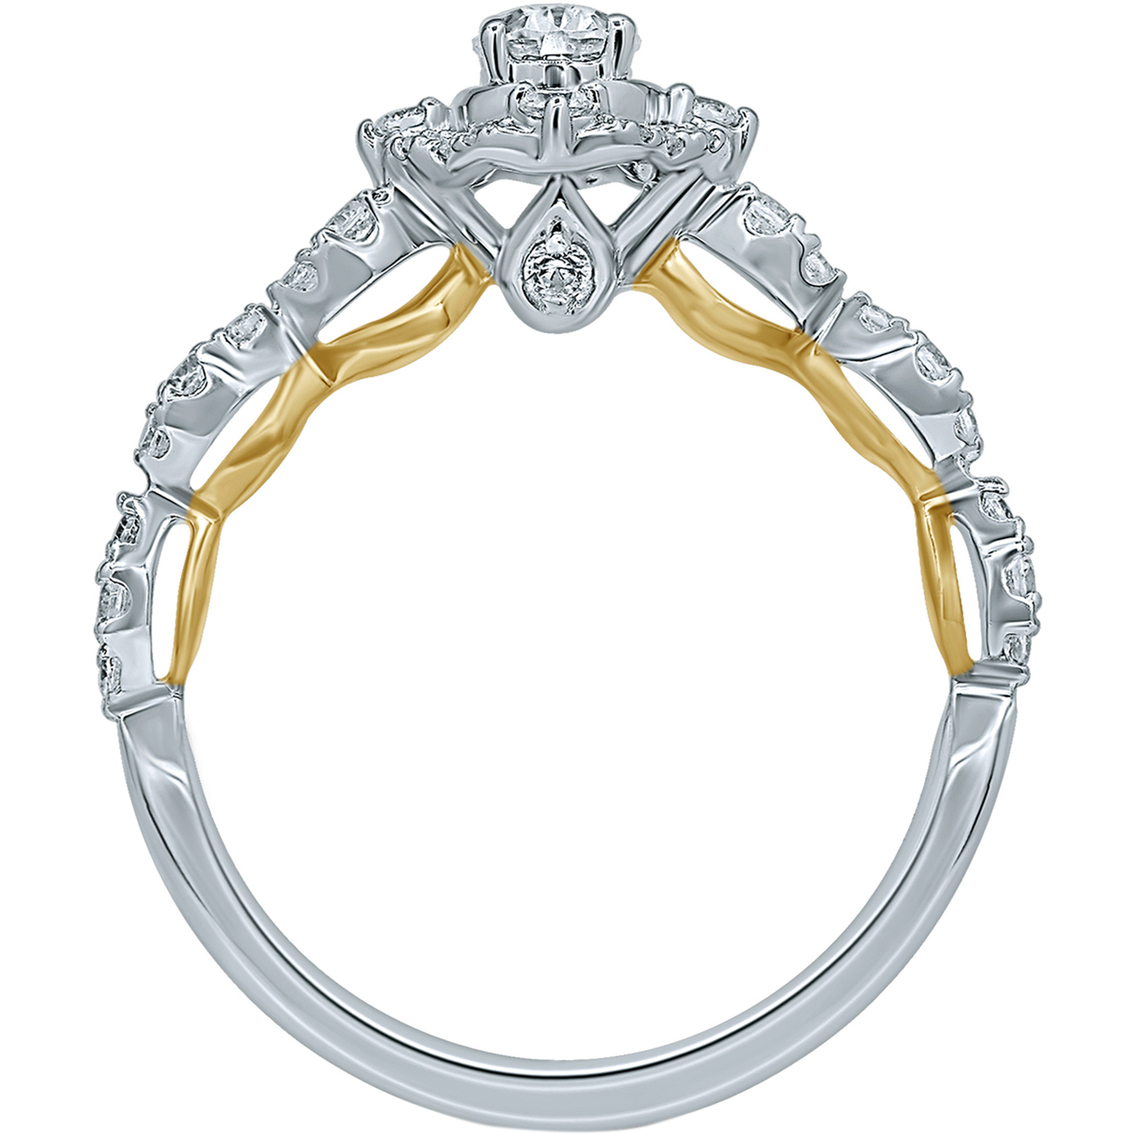 Truly Zac Posen 14K White And Yellow Gold 3/4 CTW Diamond Engagement Ring - Image 3 of 3